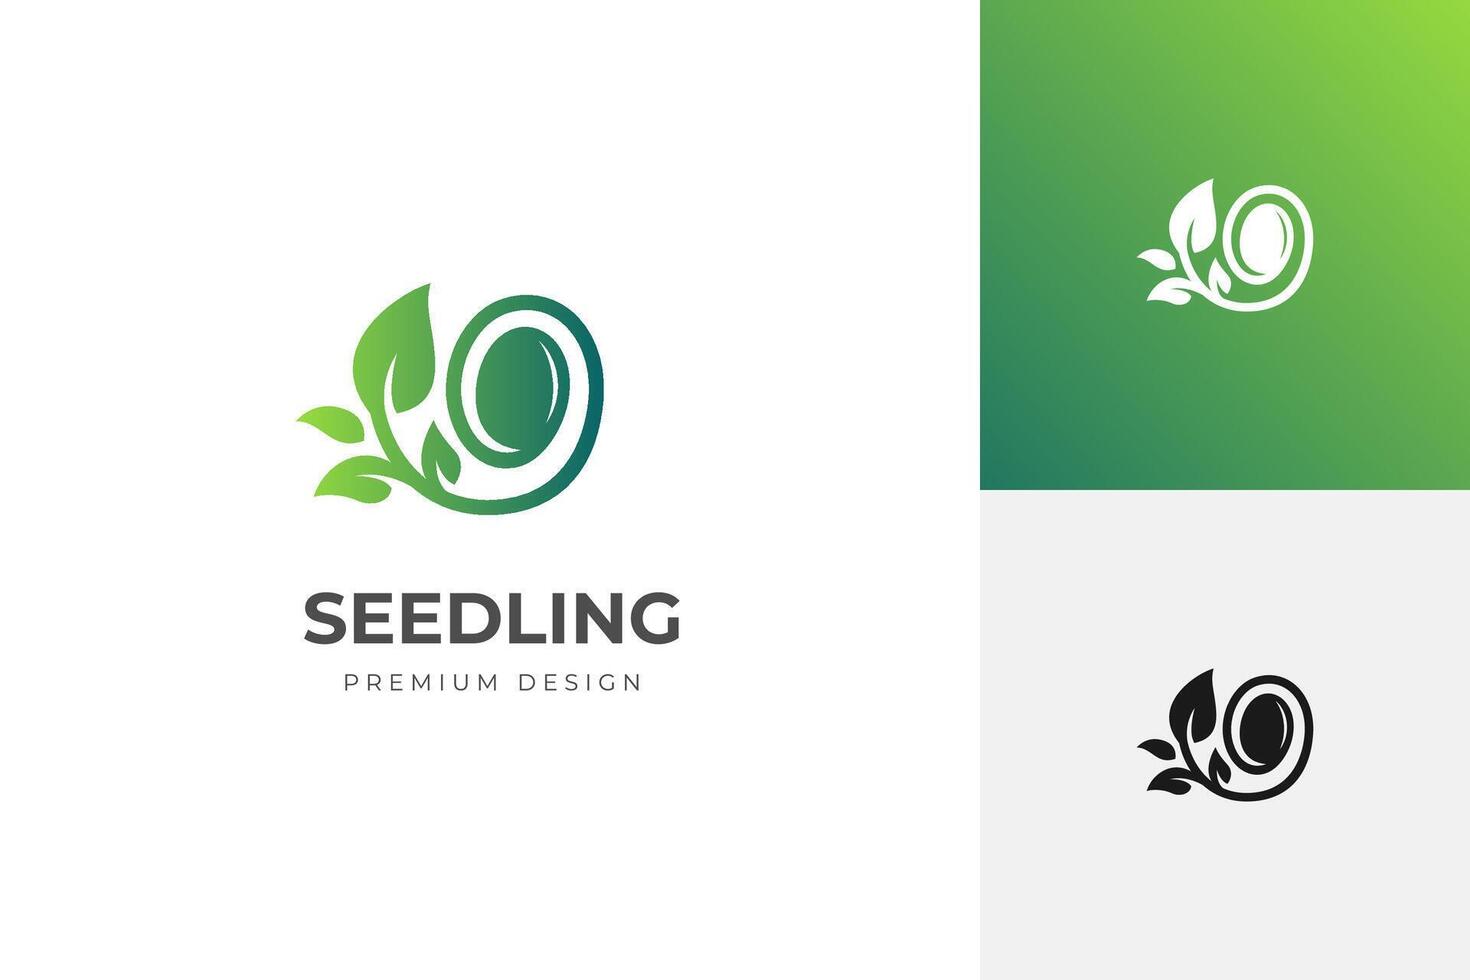 Sprout logo icon design with seed growth graphic symbol for green green earth logo template vector